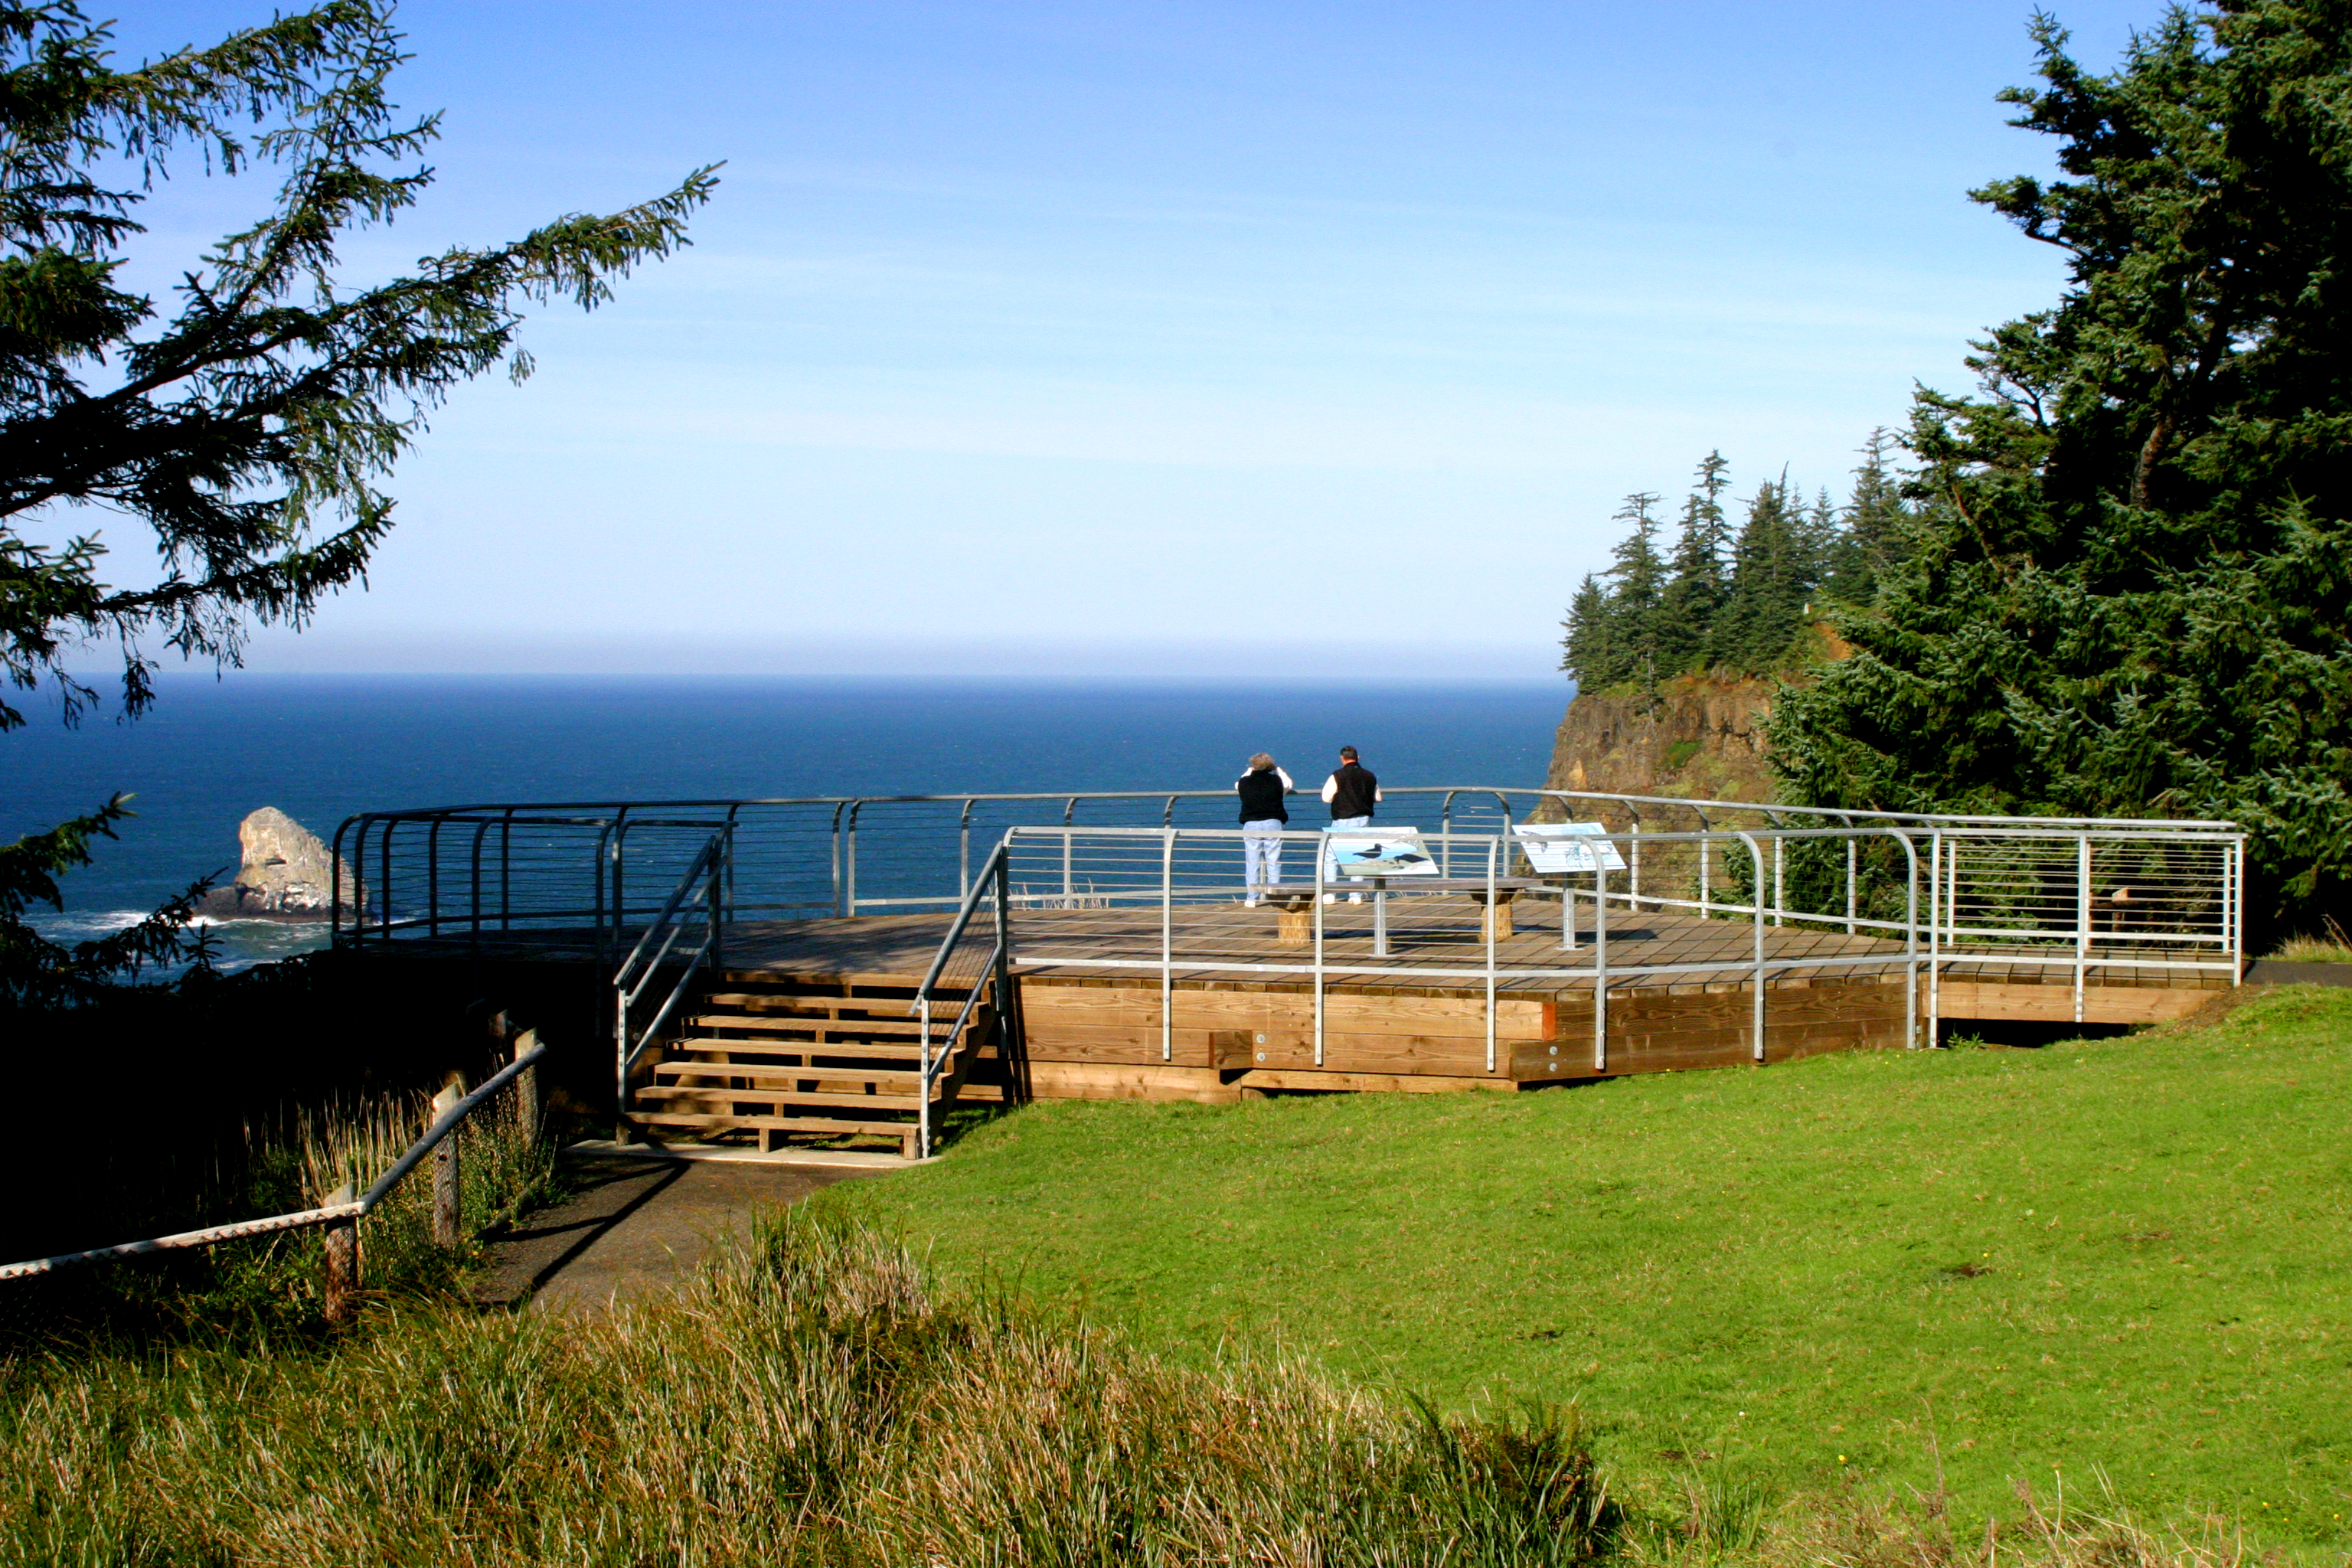 Two Visitors stand on a wooden deck overlooking sheer cliffs, rocky sea stacks, and the roiling Pacific.